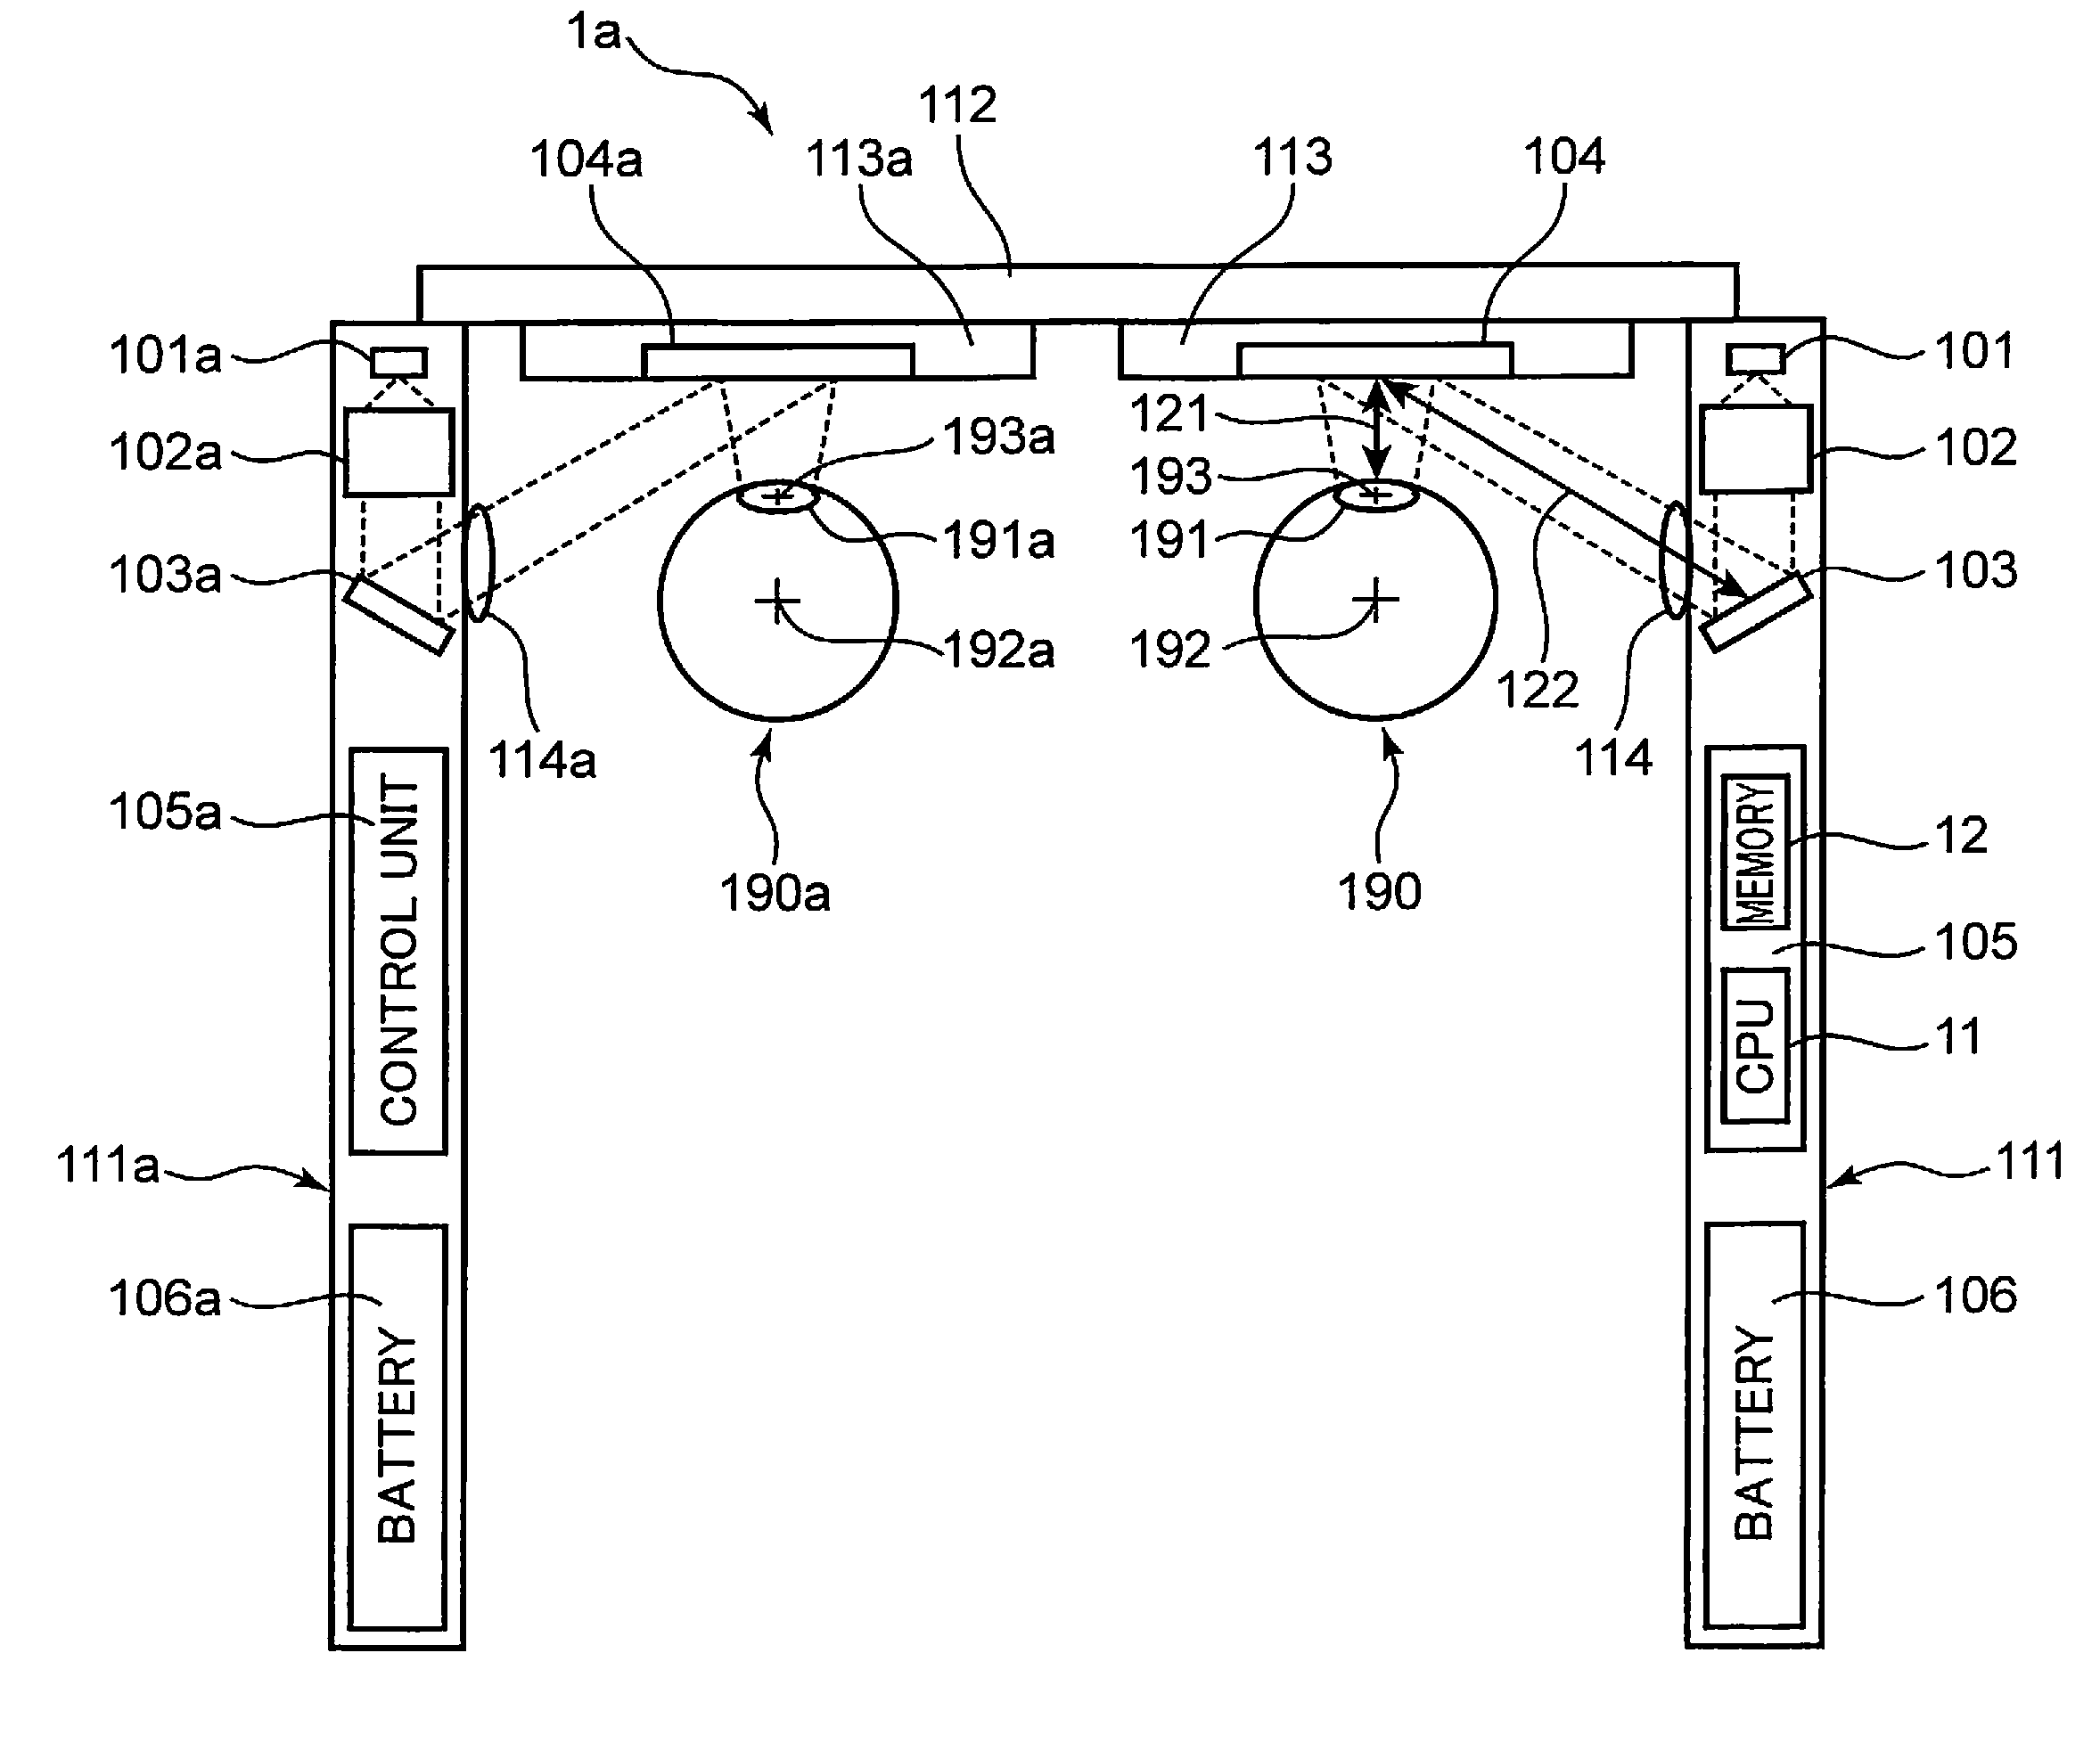 Computer generated hologram type display device